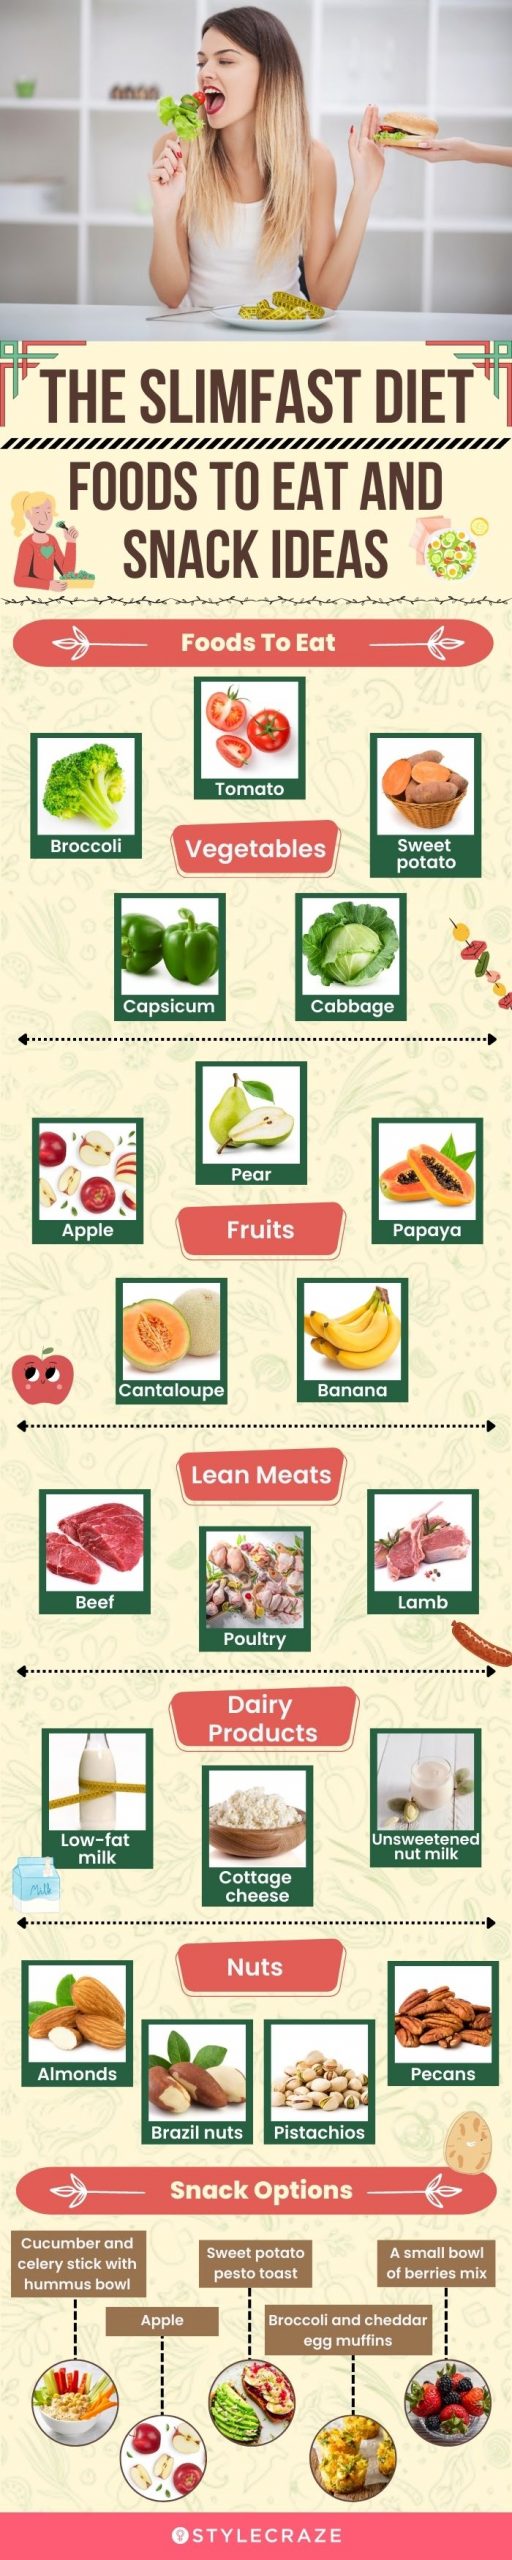 the slimfast diet foods to eat and snack ideas(infographic)